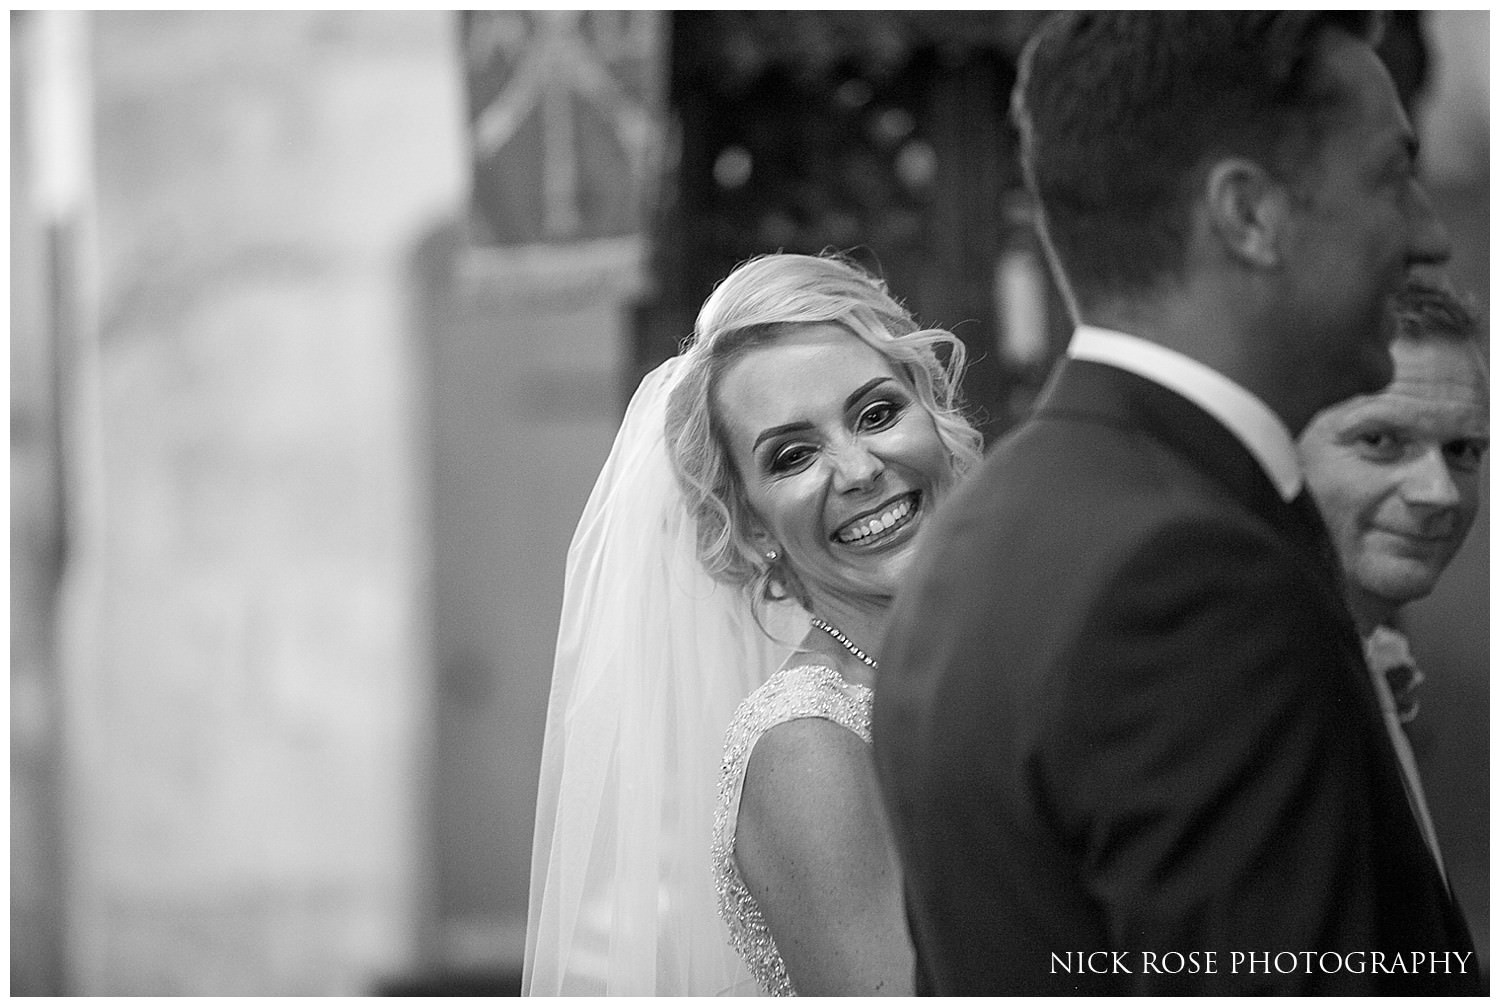  St Mary's church bride smiling during the wedding ceremony 